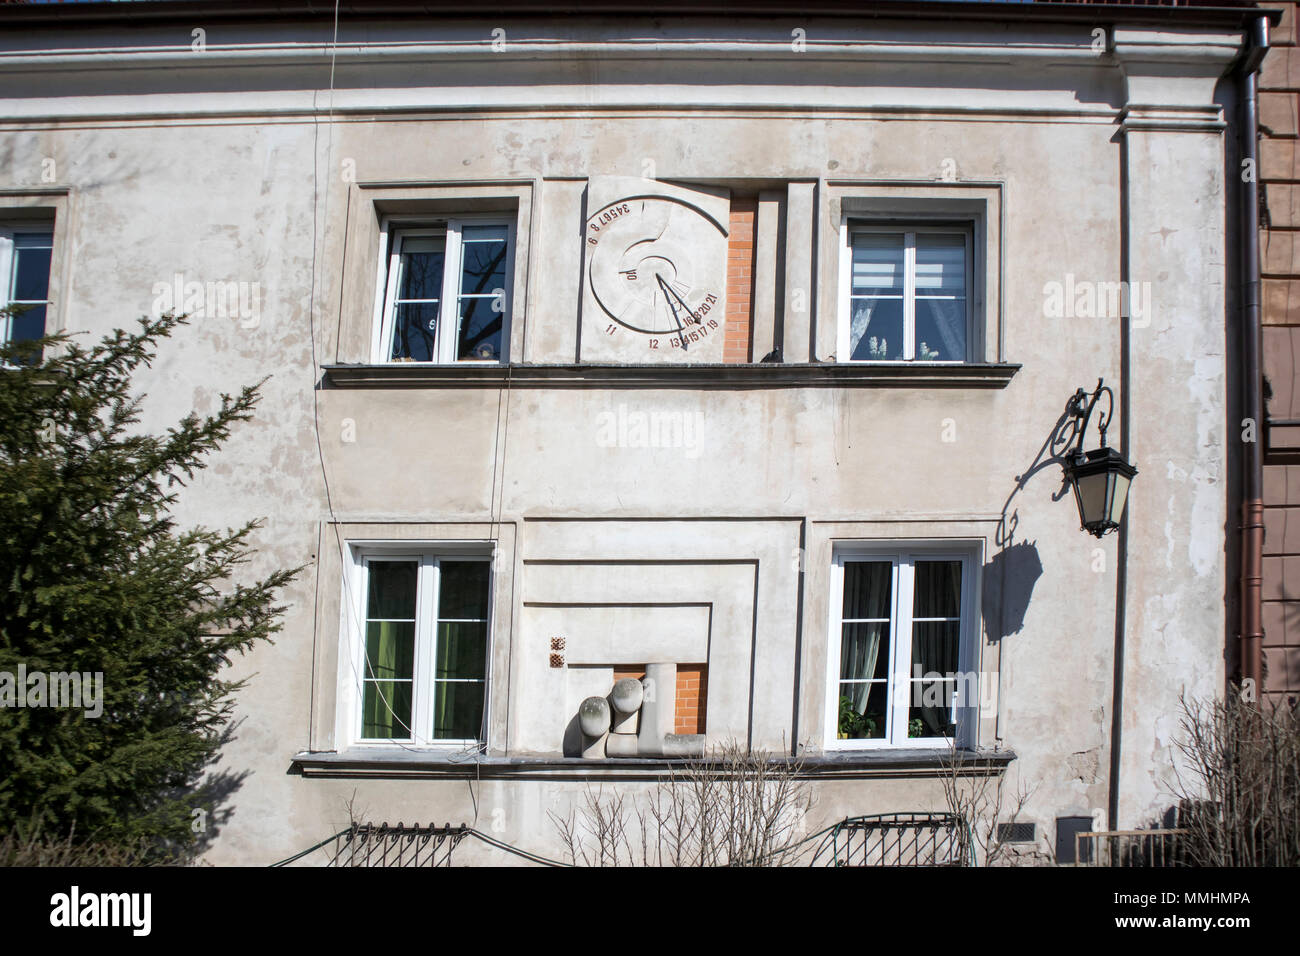 WARSAW, POLAND - APRIL 28, 2018: Ancient sundial on the external wall of building in Warsaw Stock Photo